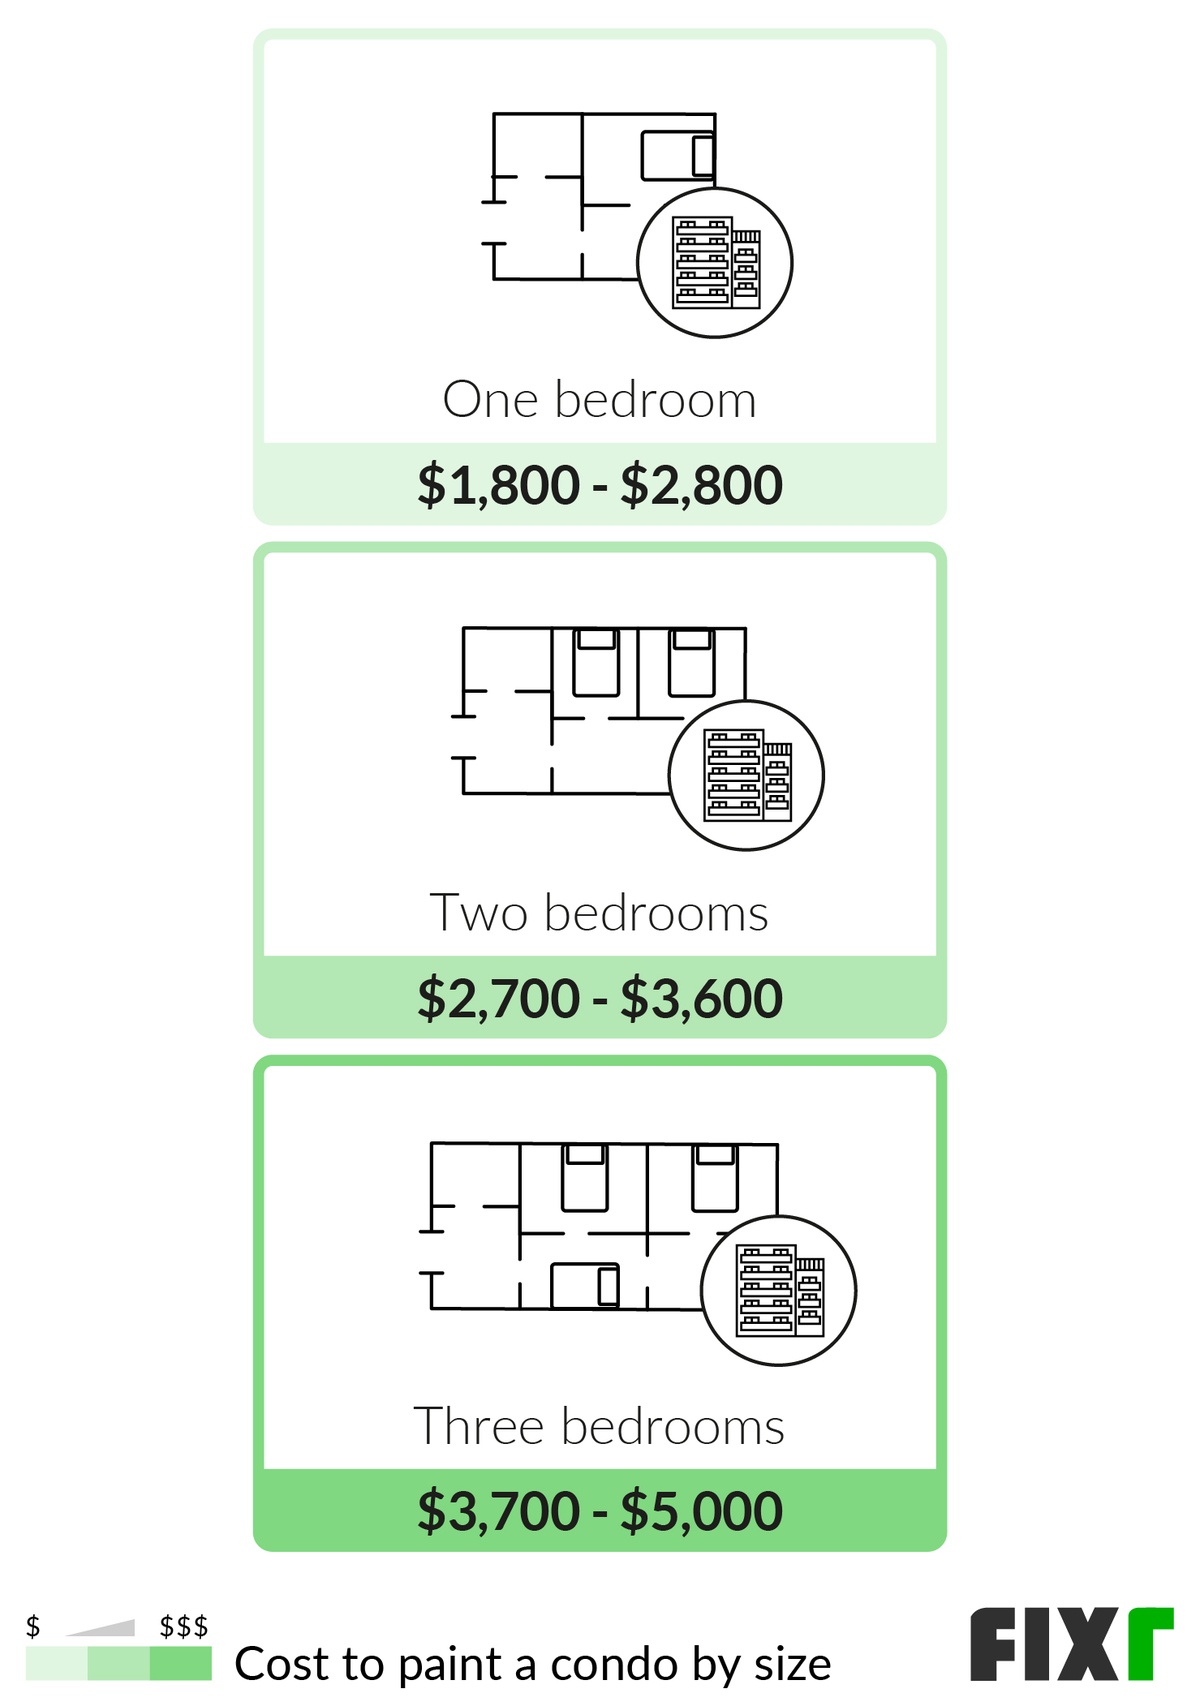 Cost to paint a one, two, and three-bedroom condo